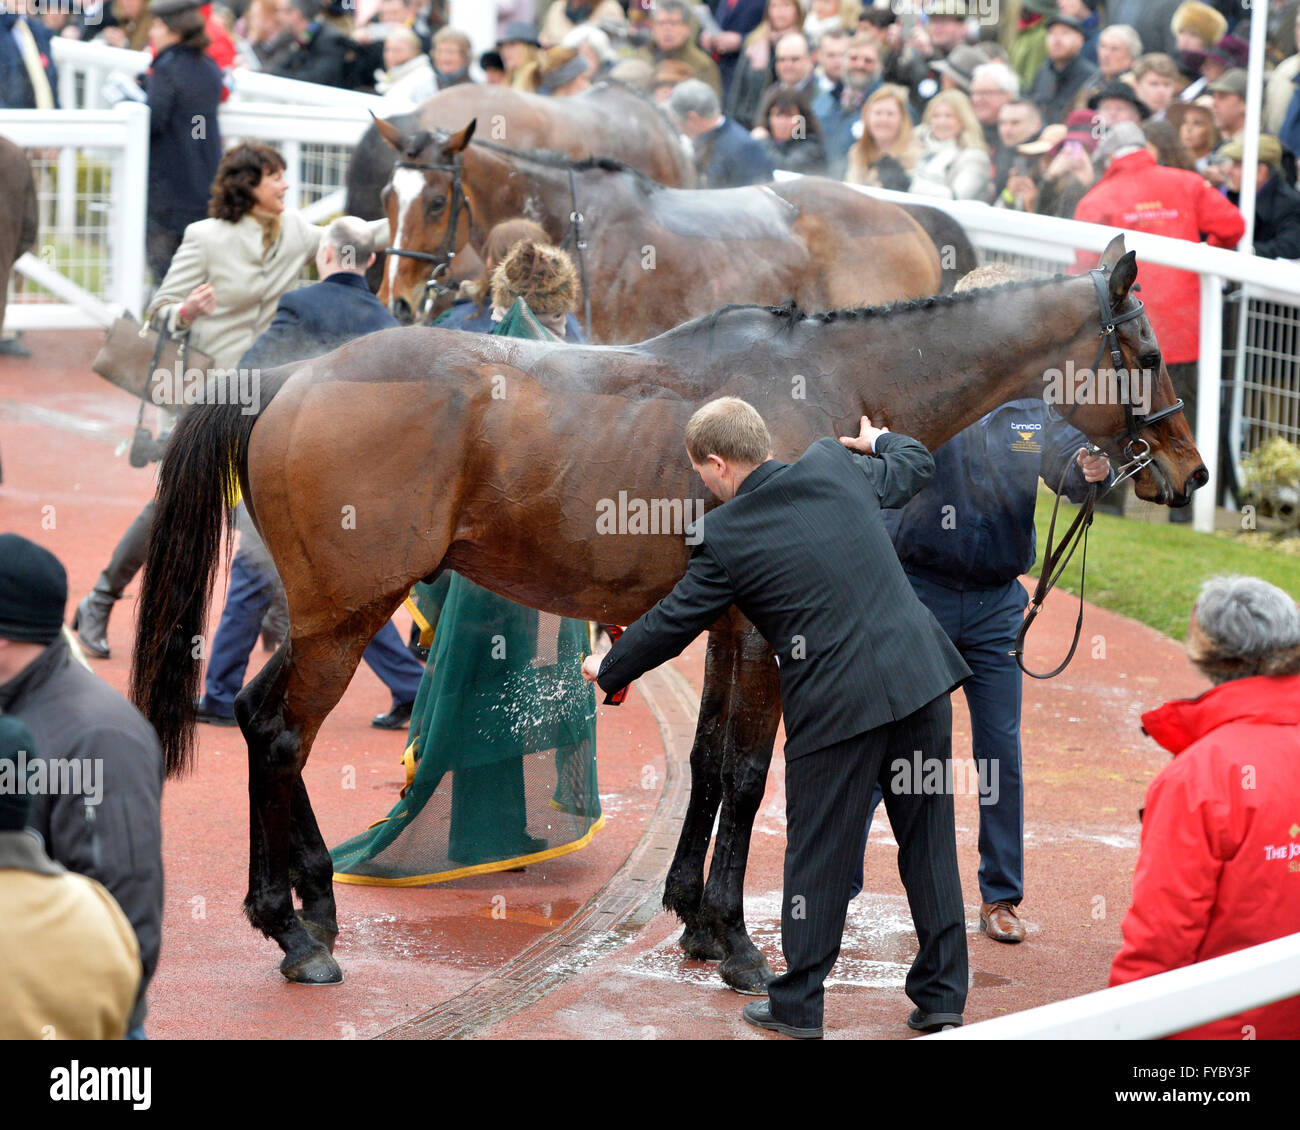 Cheltenham Gold Cup Day 18.03.16 Race 4 Gold Cup cooling horses down after steeplechase race Stock Photo